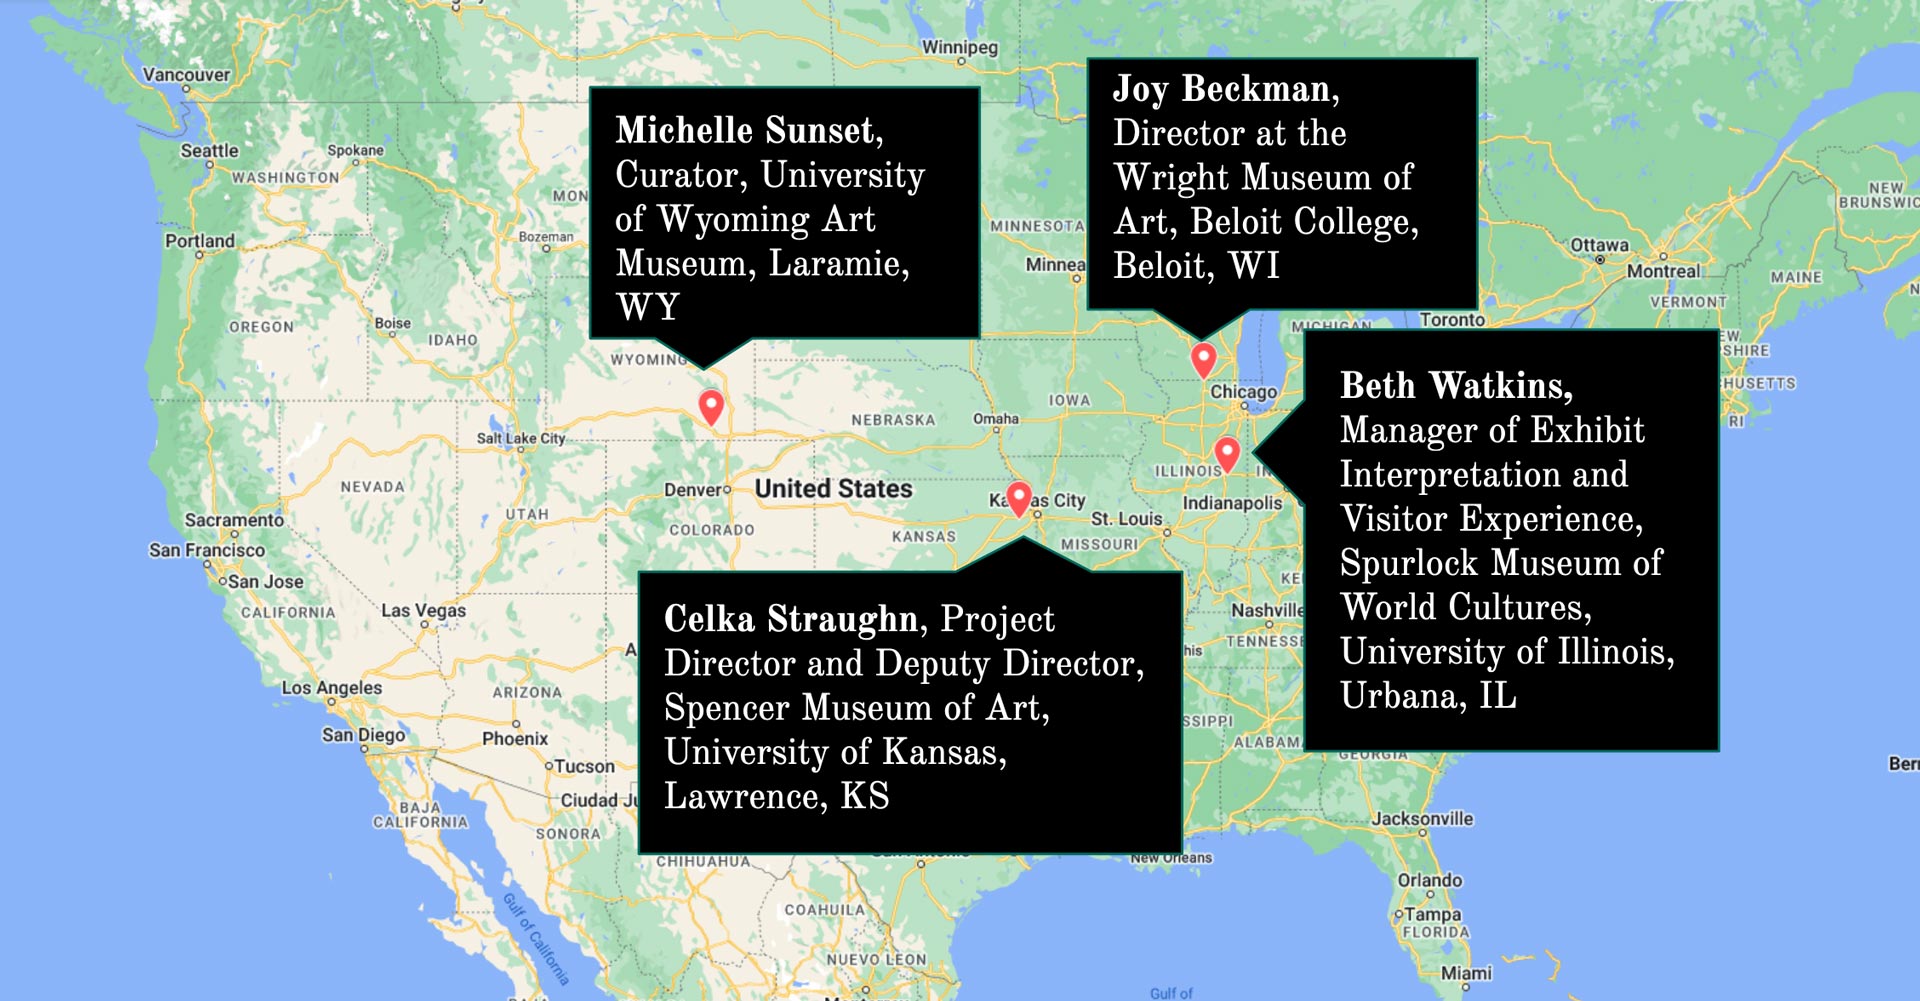 map of the US with four pins showing the names and respective universities of each panel presenter